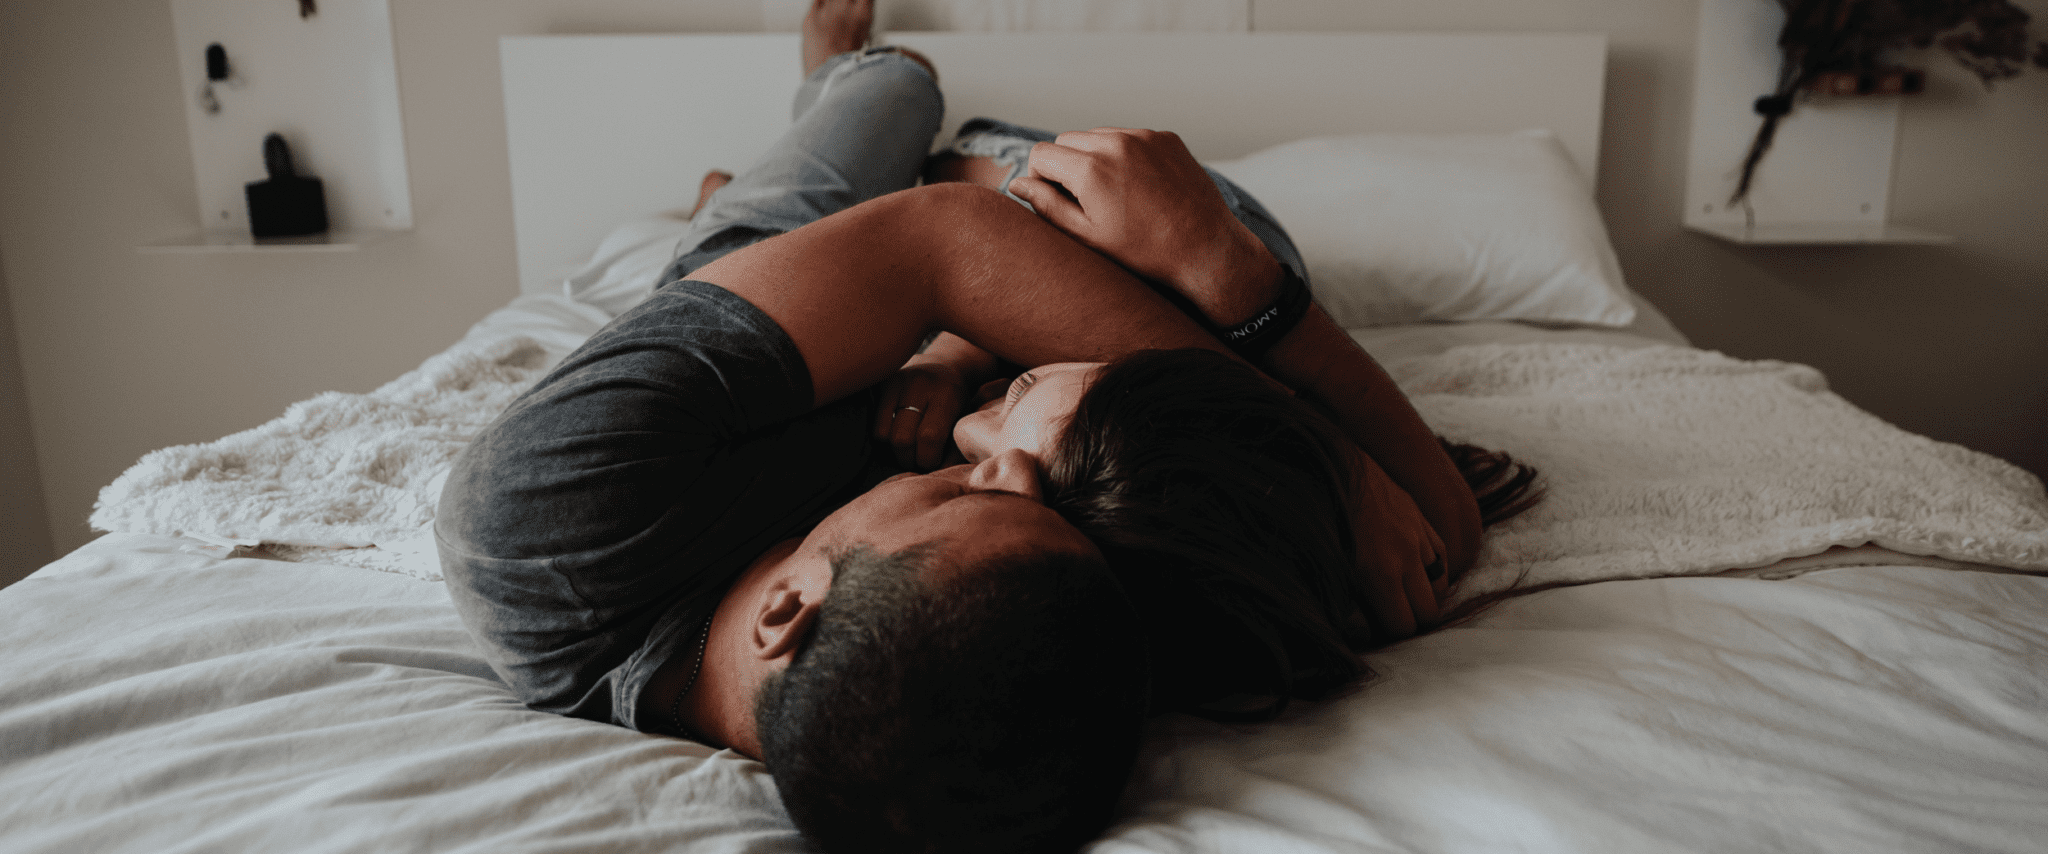 5 Tips To Keep Sex Healthy In Your Marriage photo